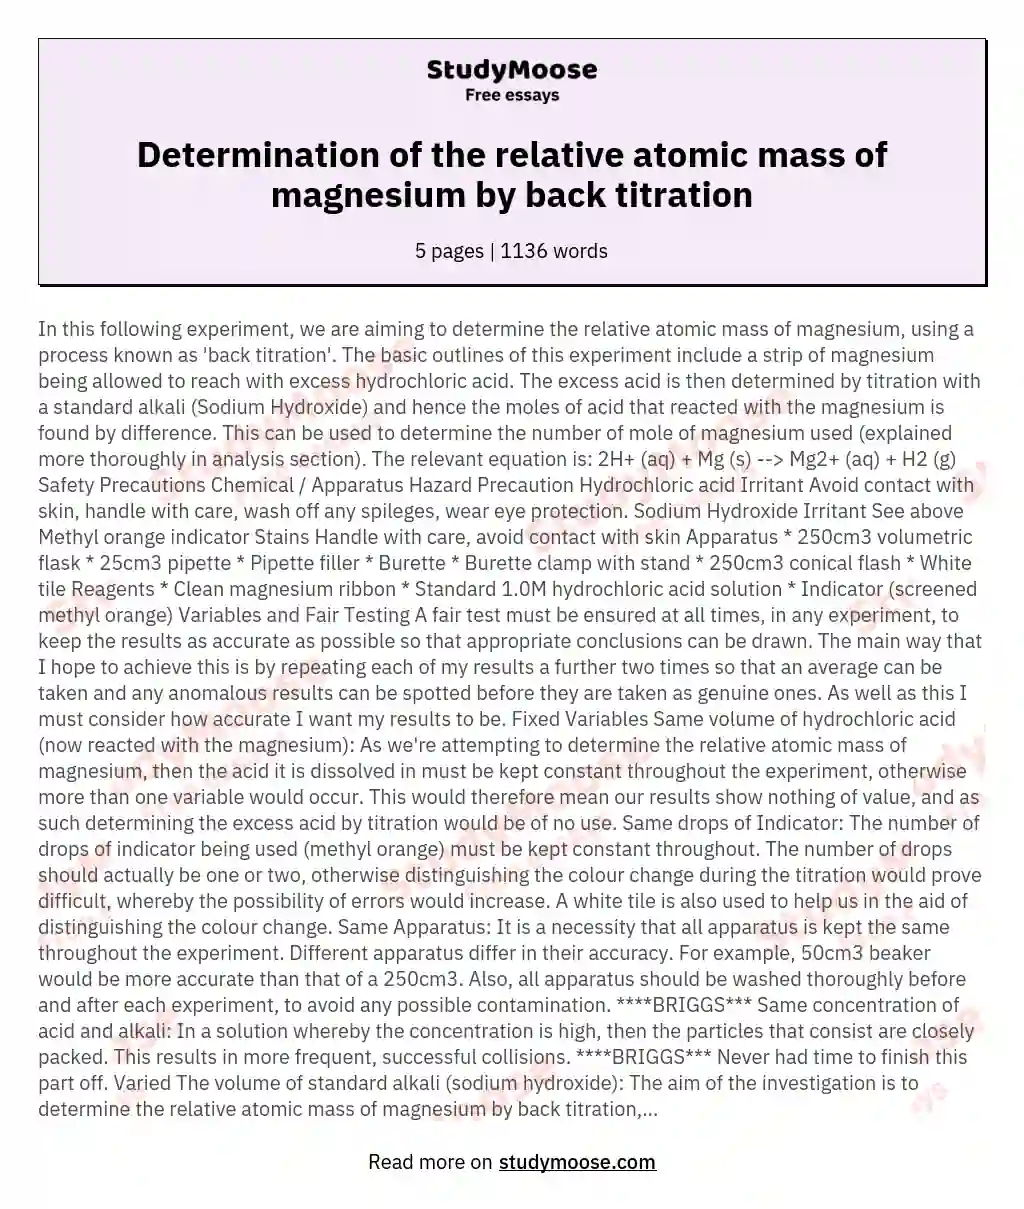 Determination of the relative atomic mass of magnesium by back titration